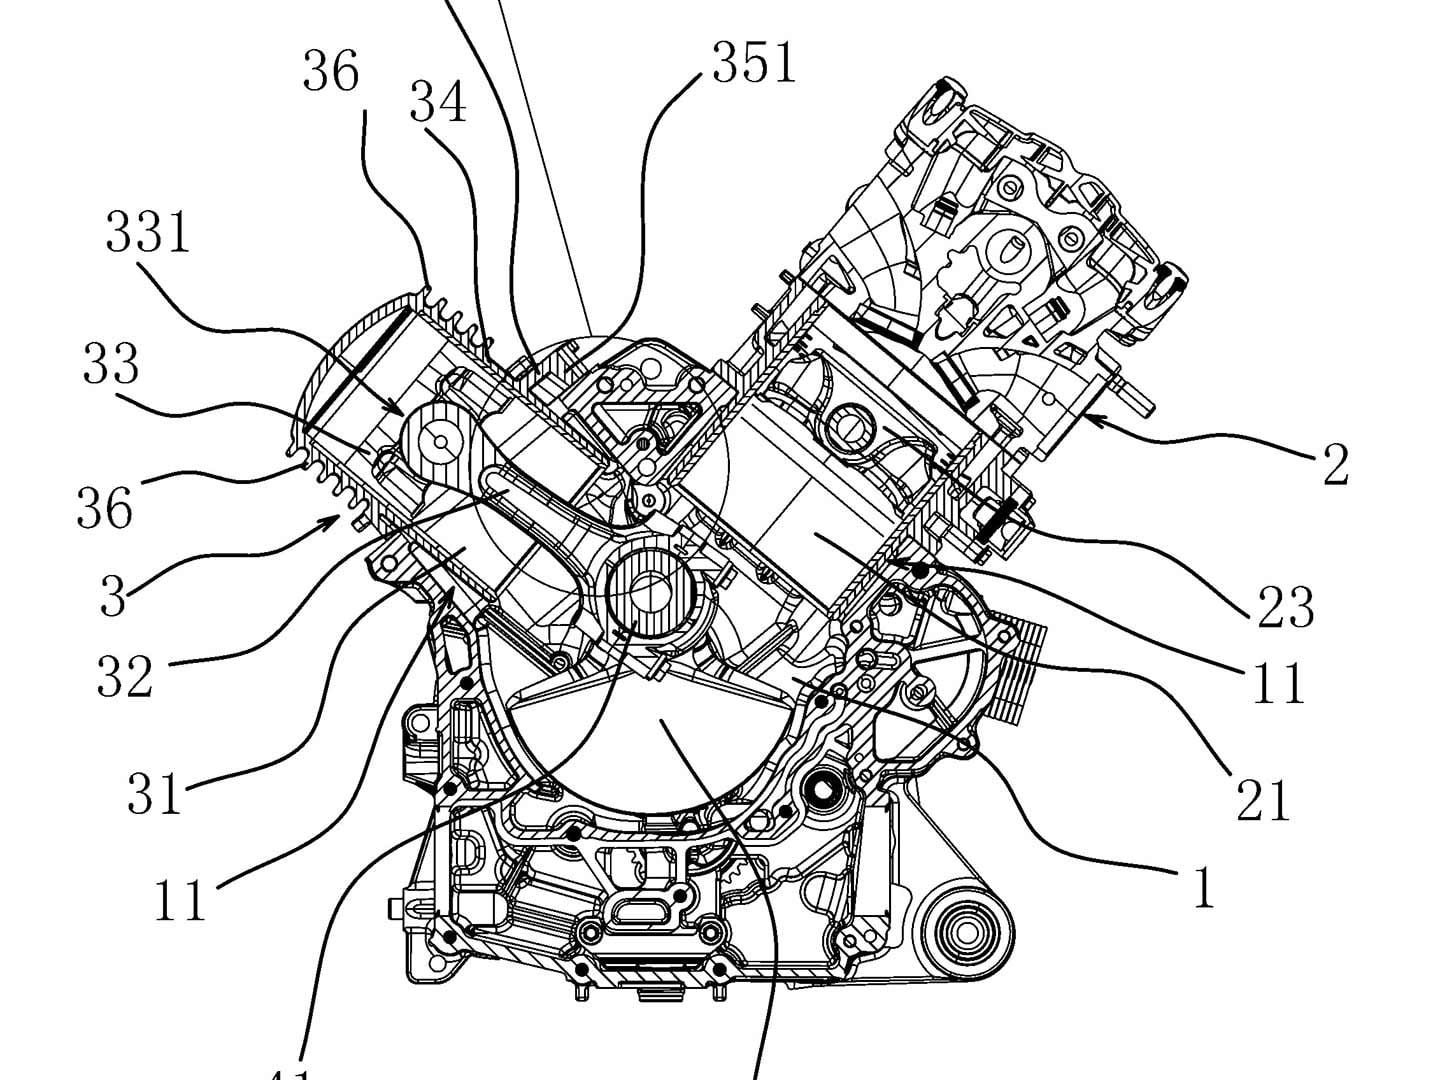 QJMotor has filed patents for a single-cylinder engine that utilizes a second dummy cylinder as a counterbalancer.